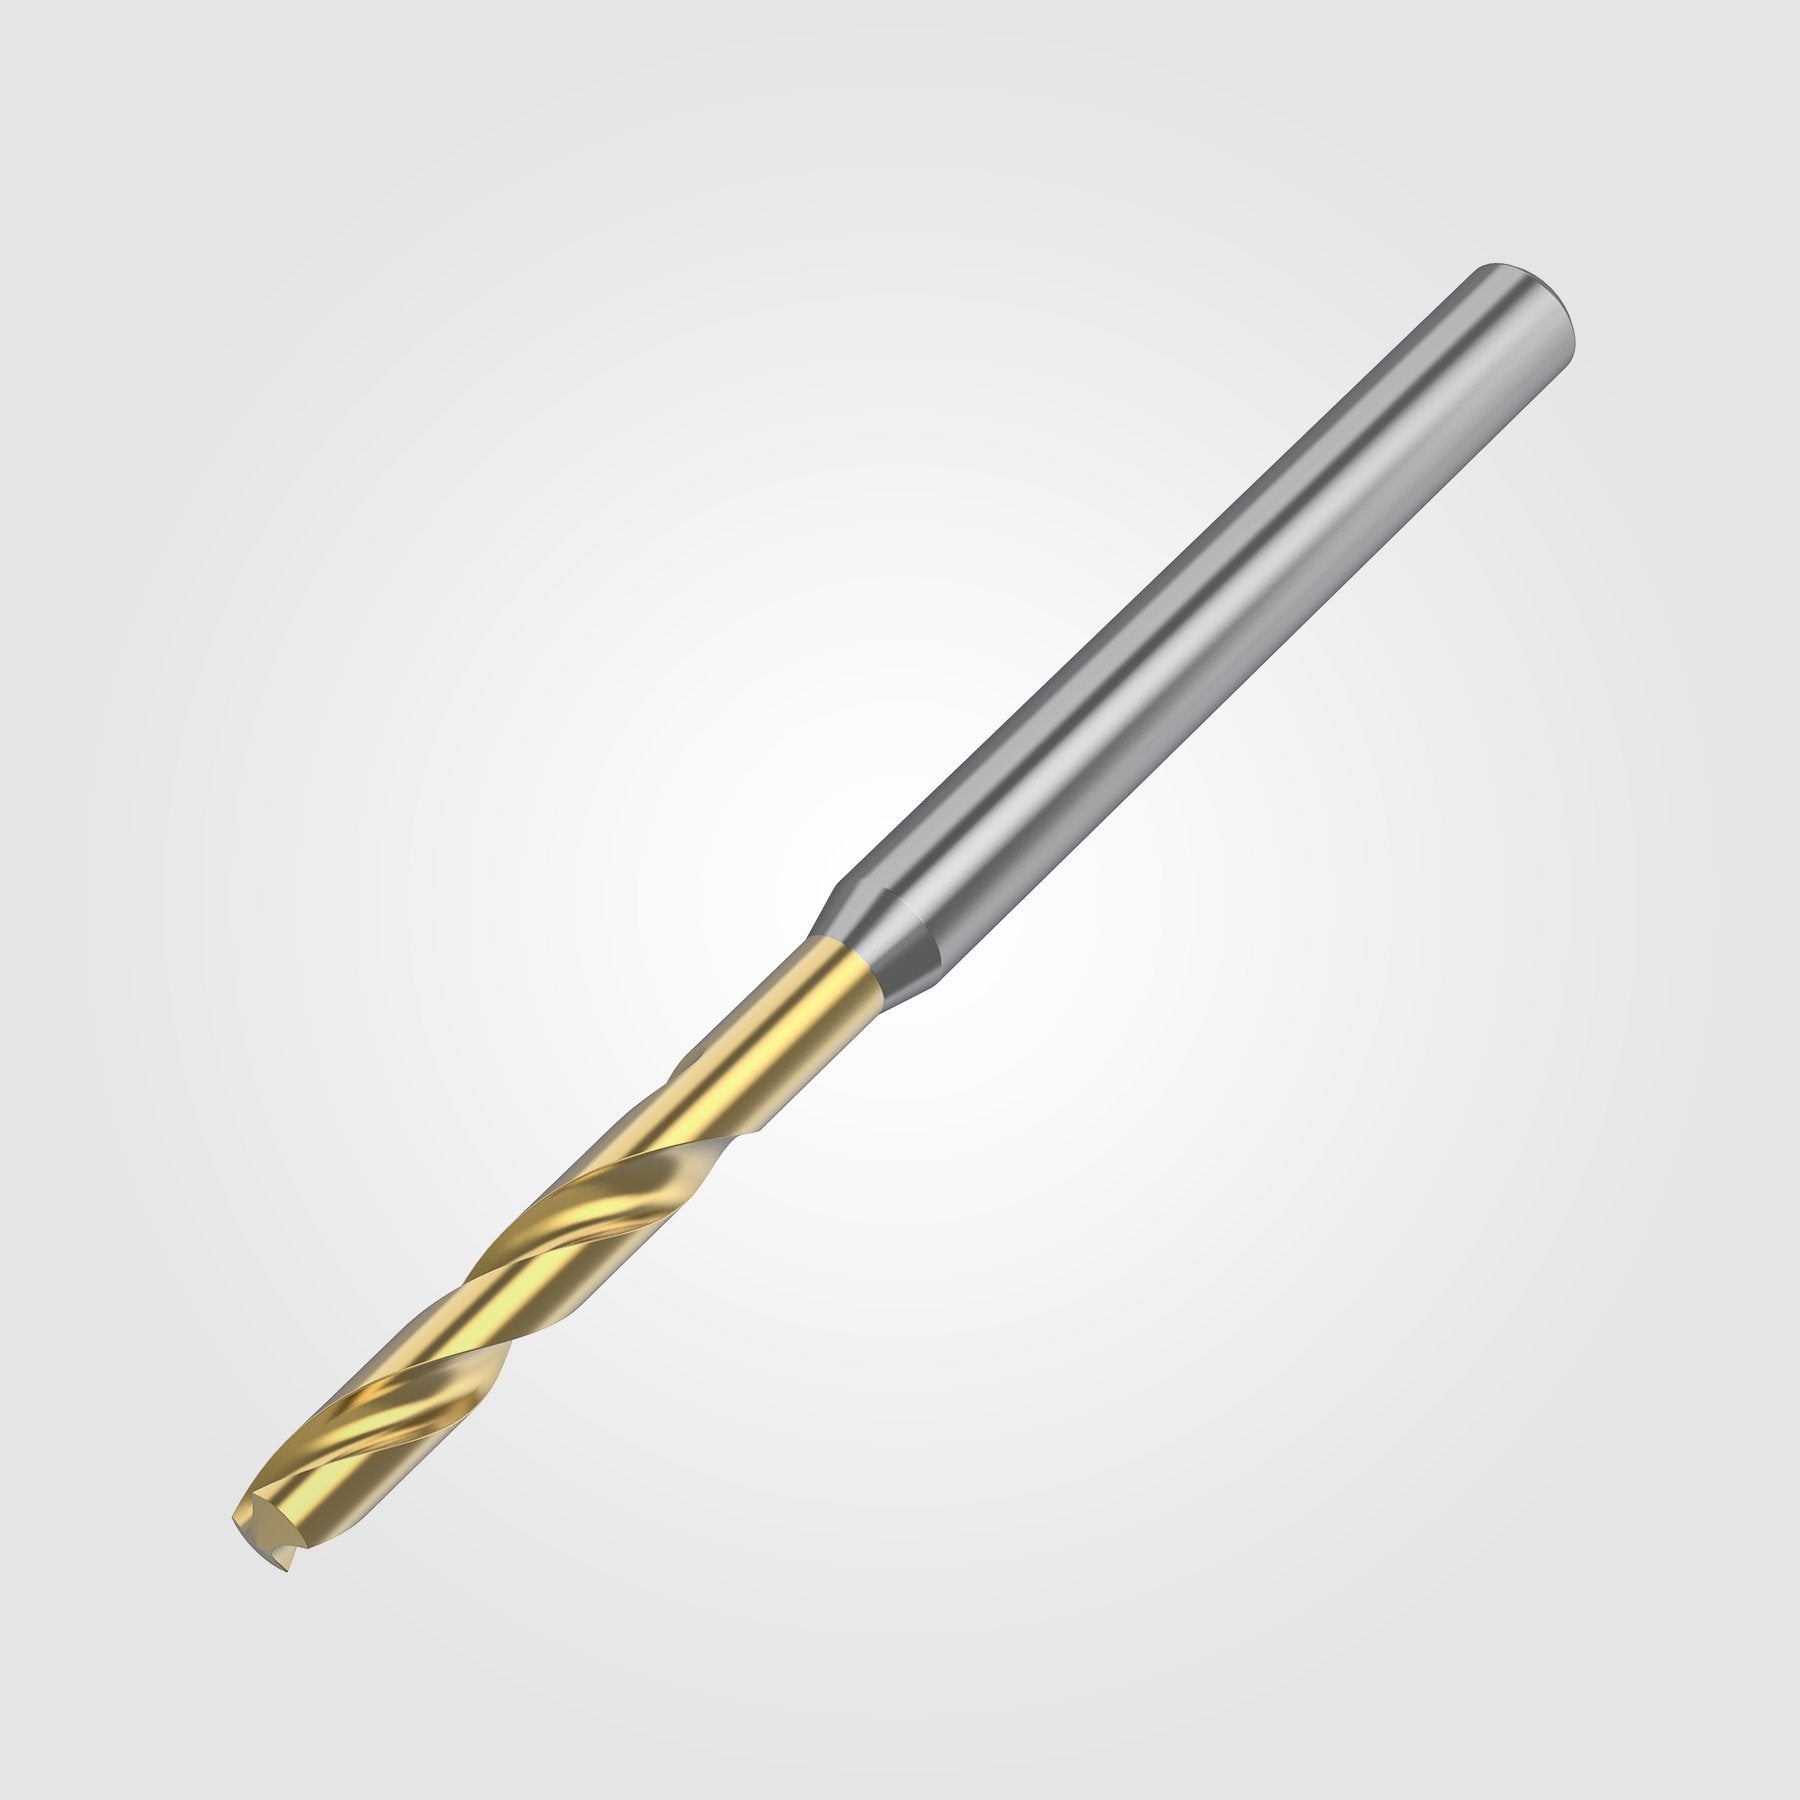 GOdrill (THROUGH COOLANT) | 6.2mm / .2441" / 3xD | SOLID CARBIDE DRILL | 4151150